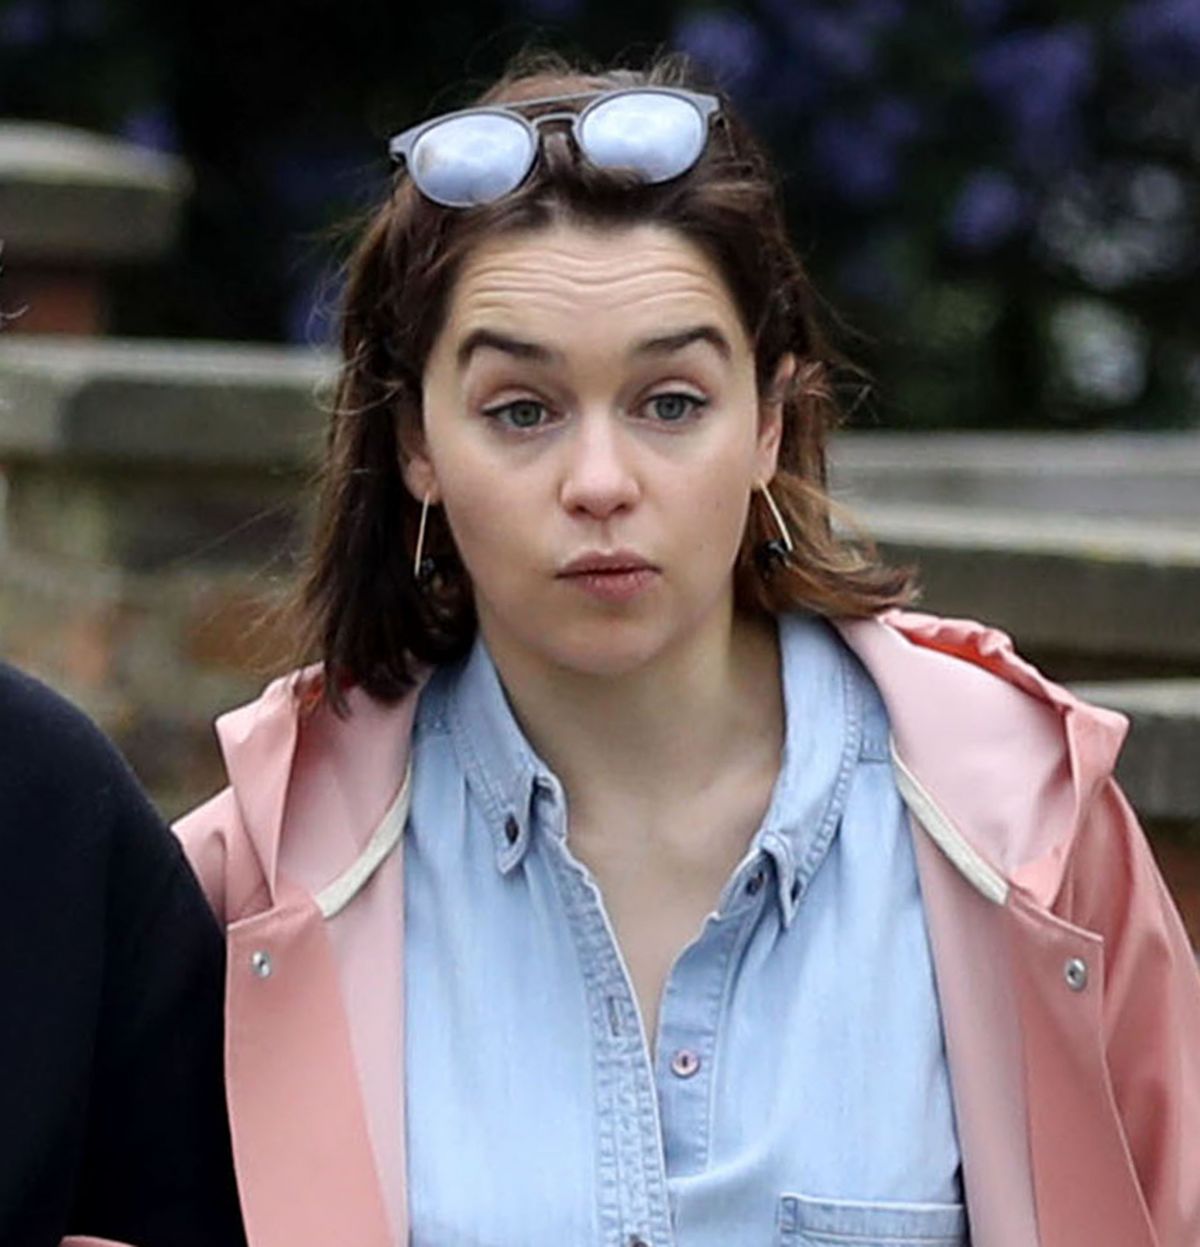 emilia-clarke-out-and-about-in-london-05-18-2017_5.jpg